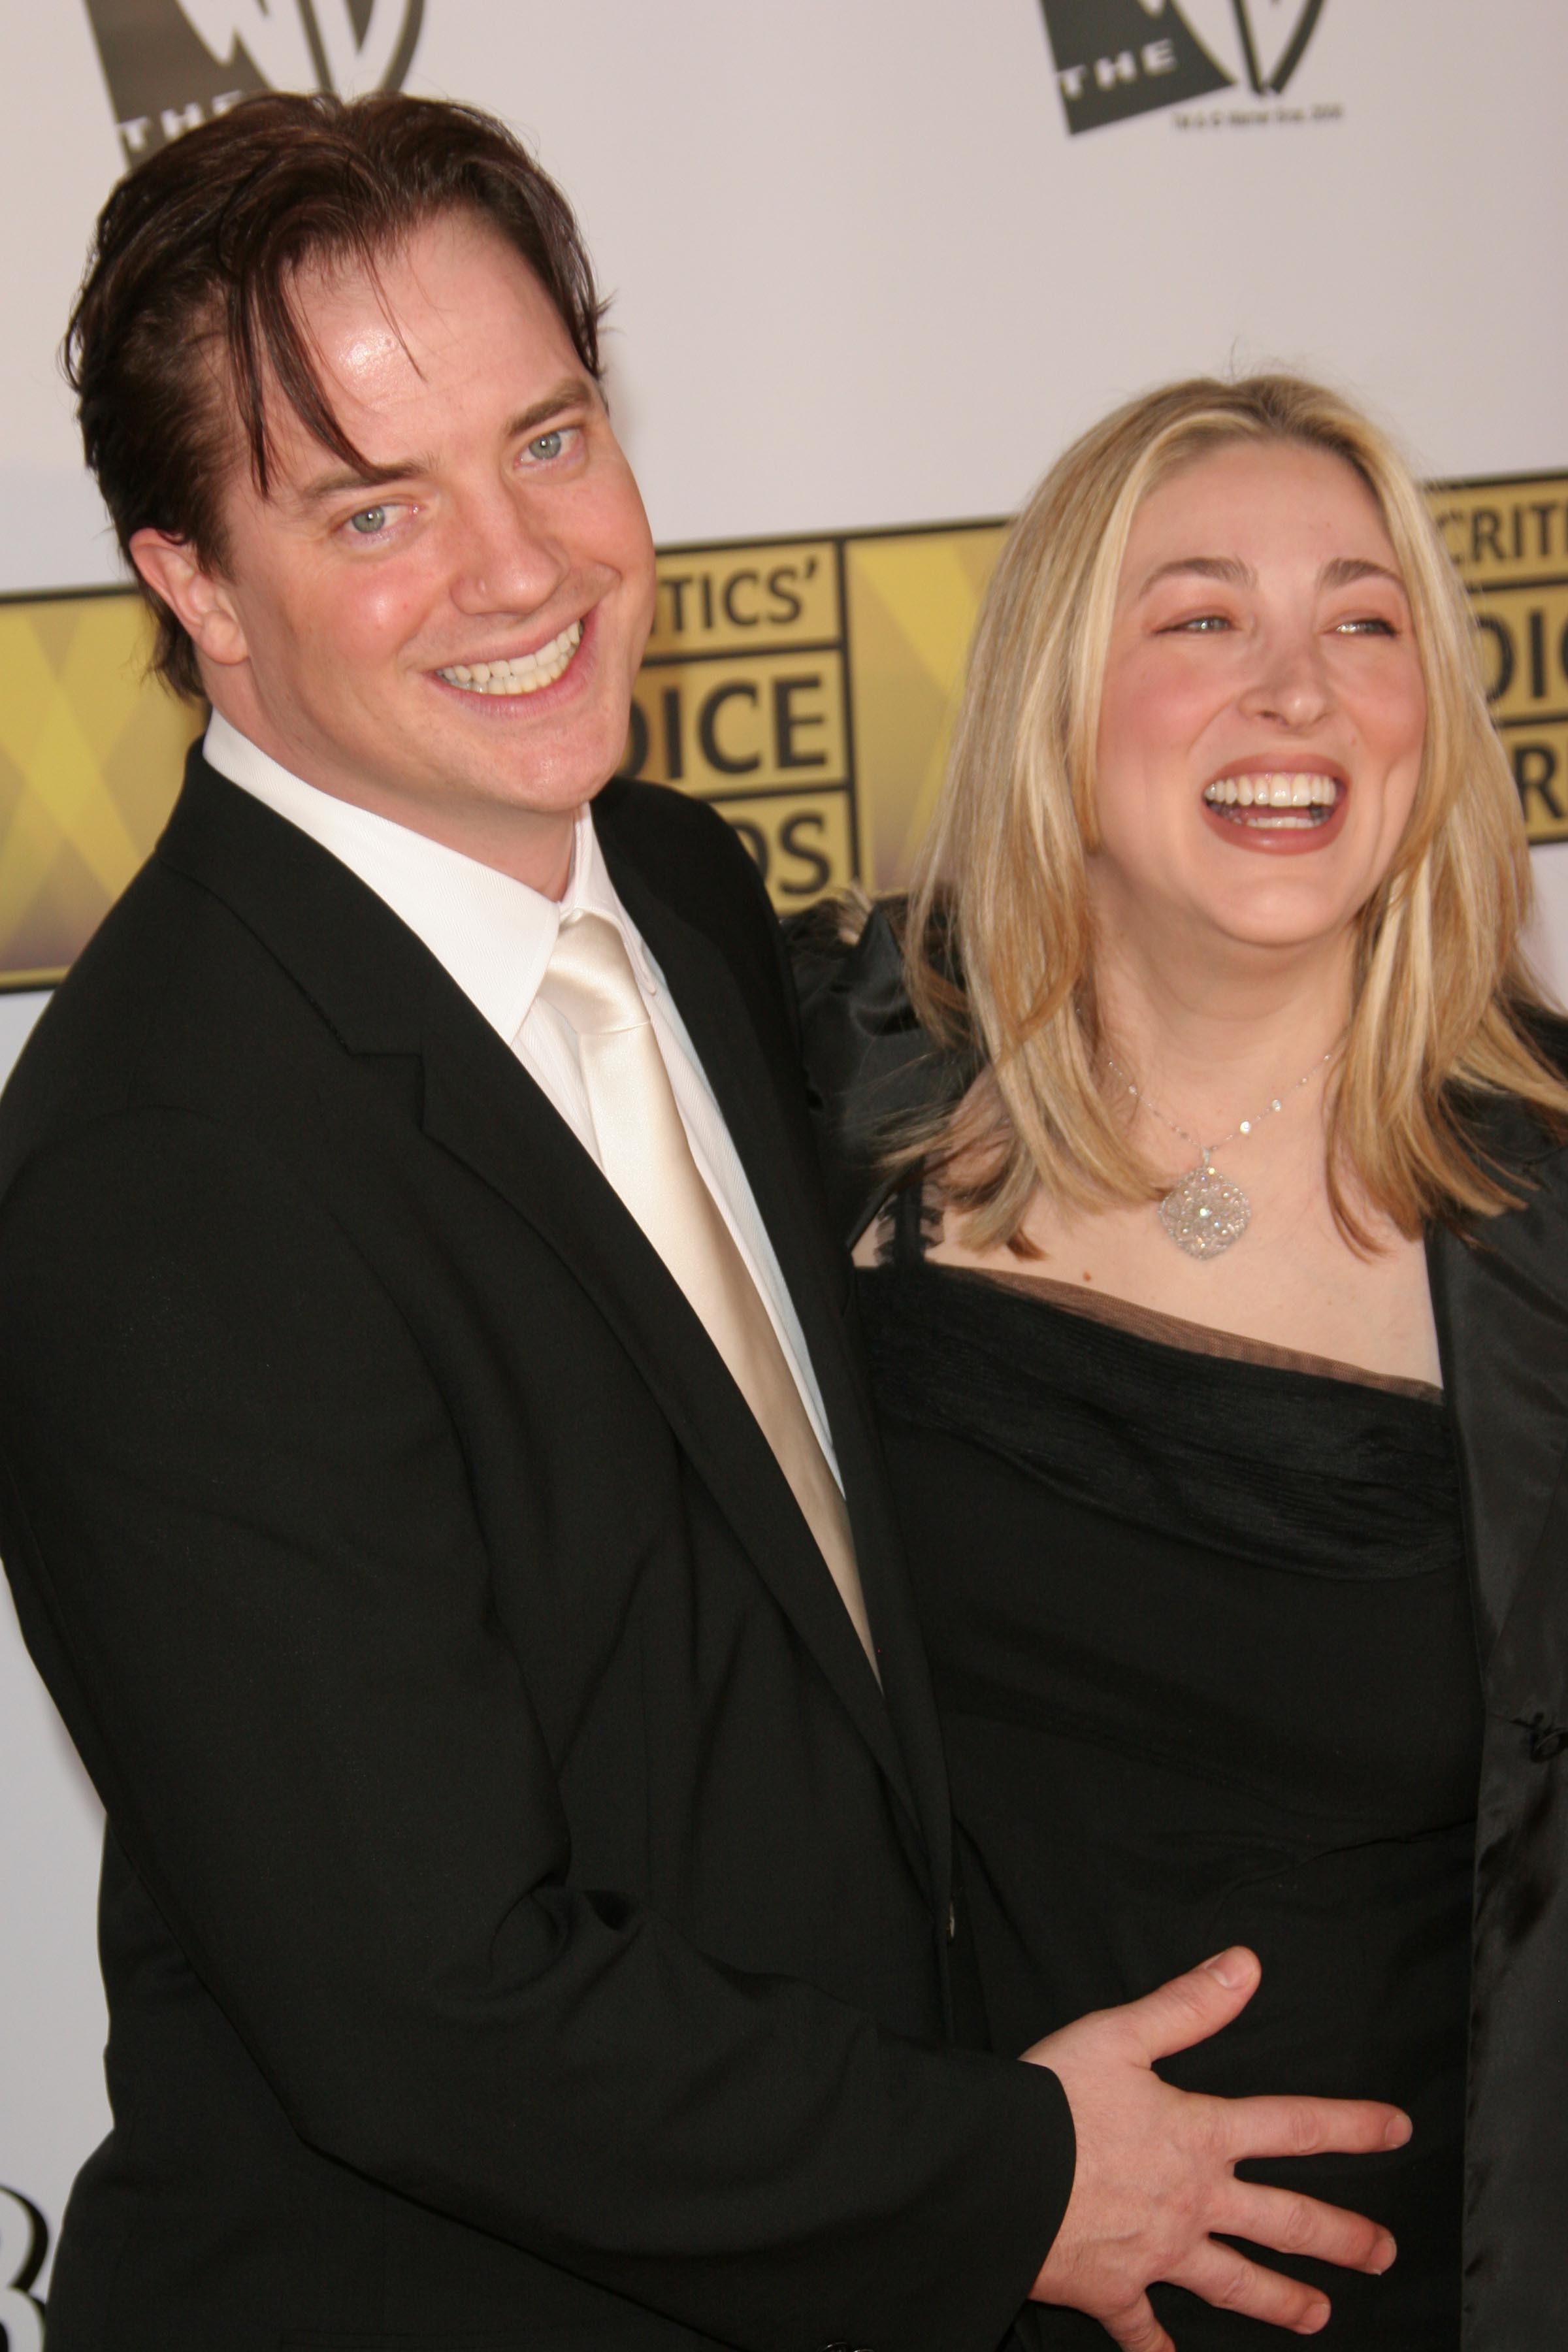 Brendan Fraser and Afton Smith at the Santa Monica Civic Auditorium on January 9, 2006 in Santa Monica, California | Source: Getty Images